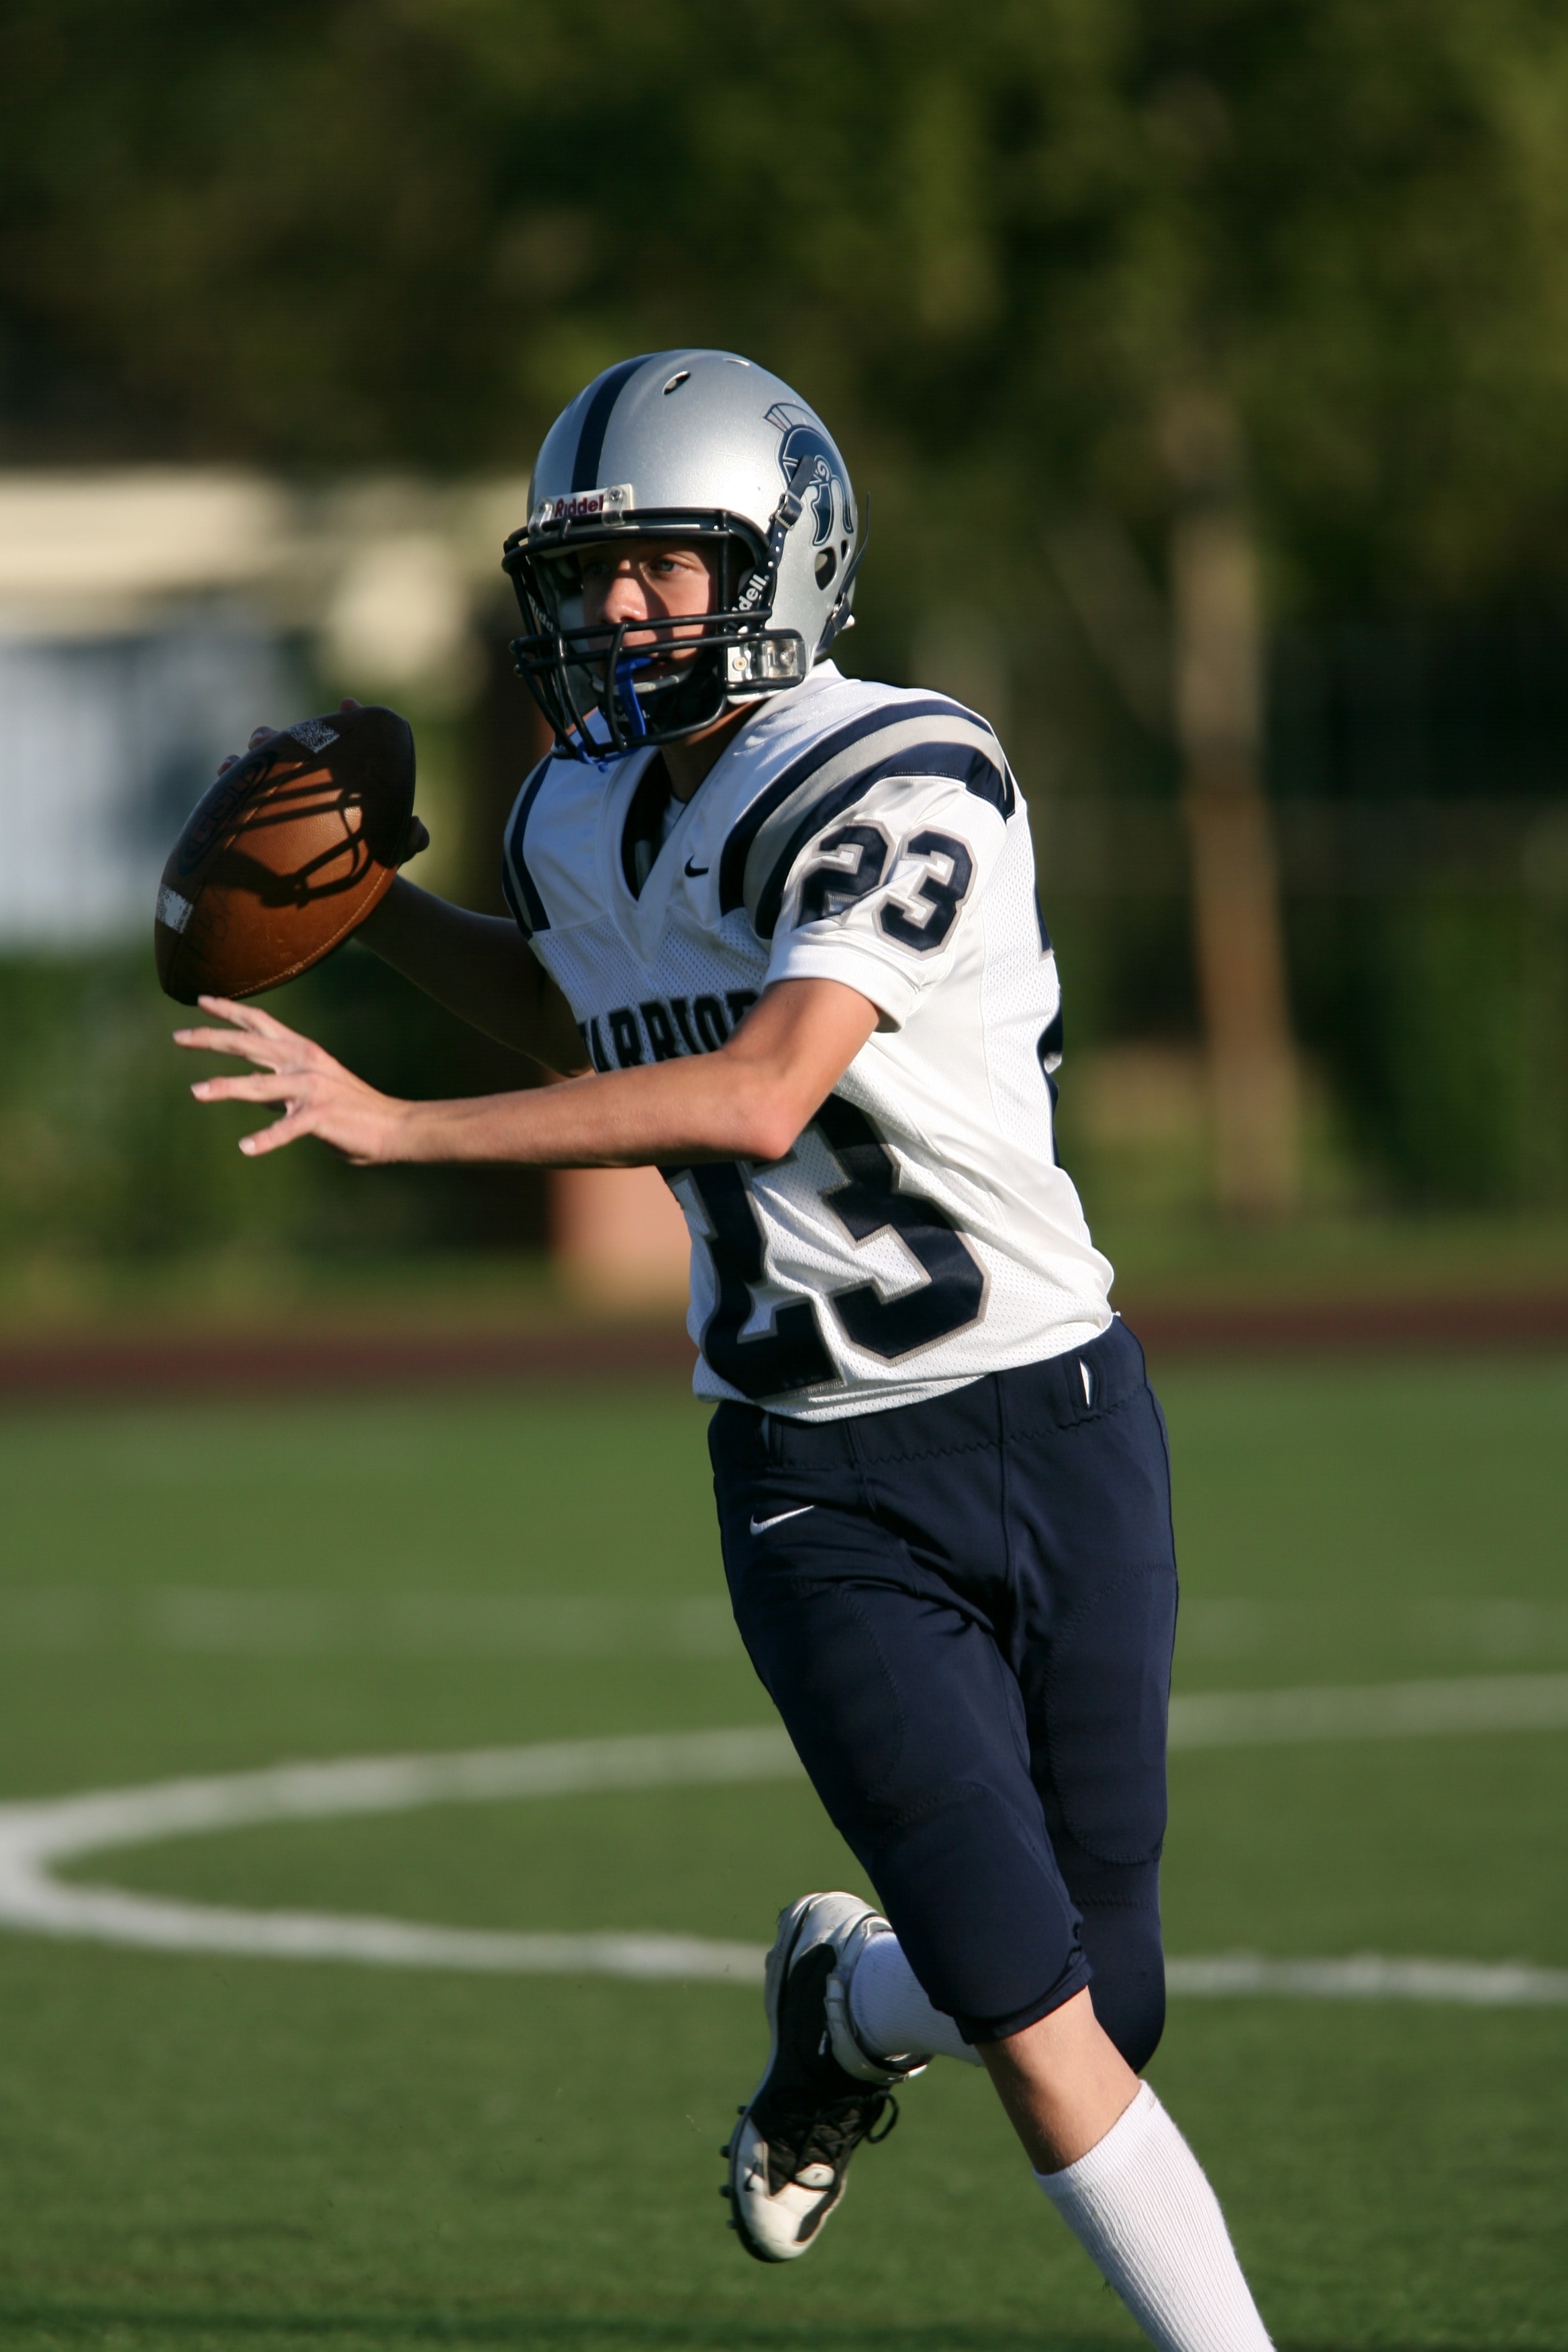 man in white and blue american football outfit holding a football while running at daytime